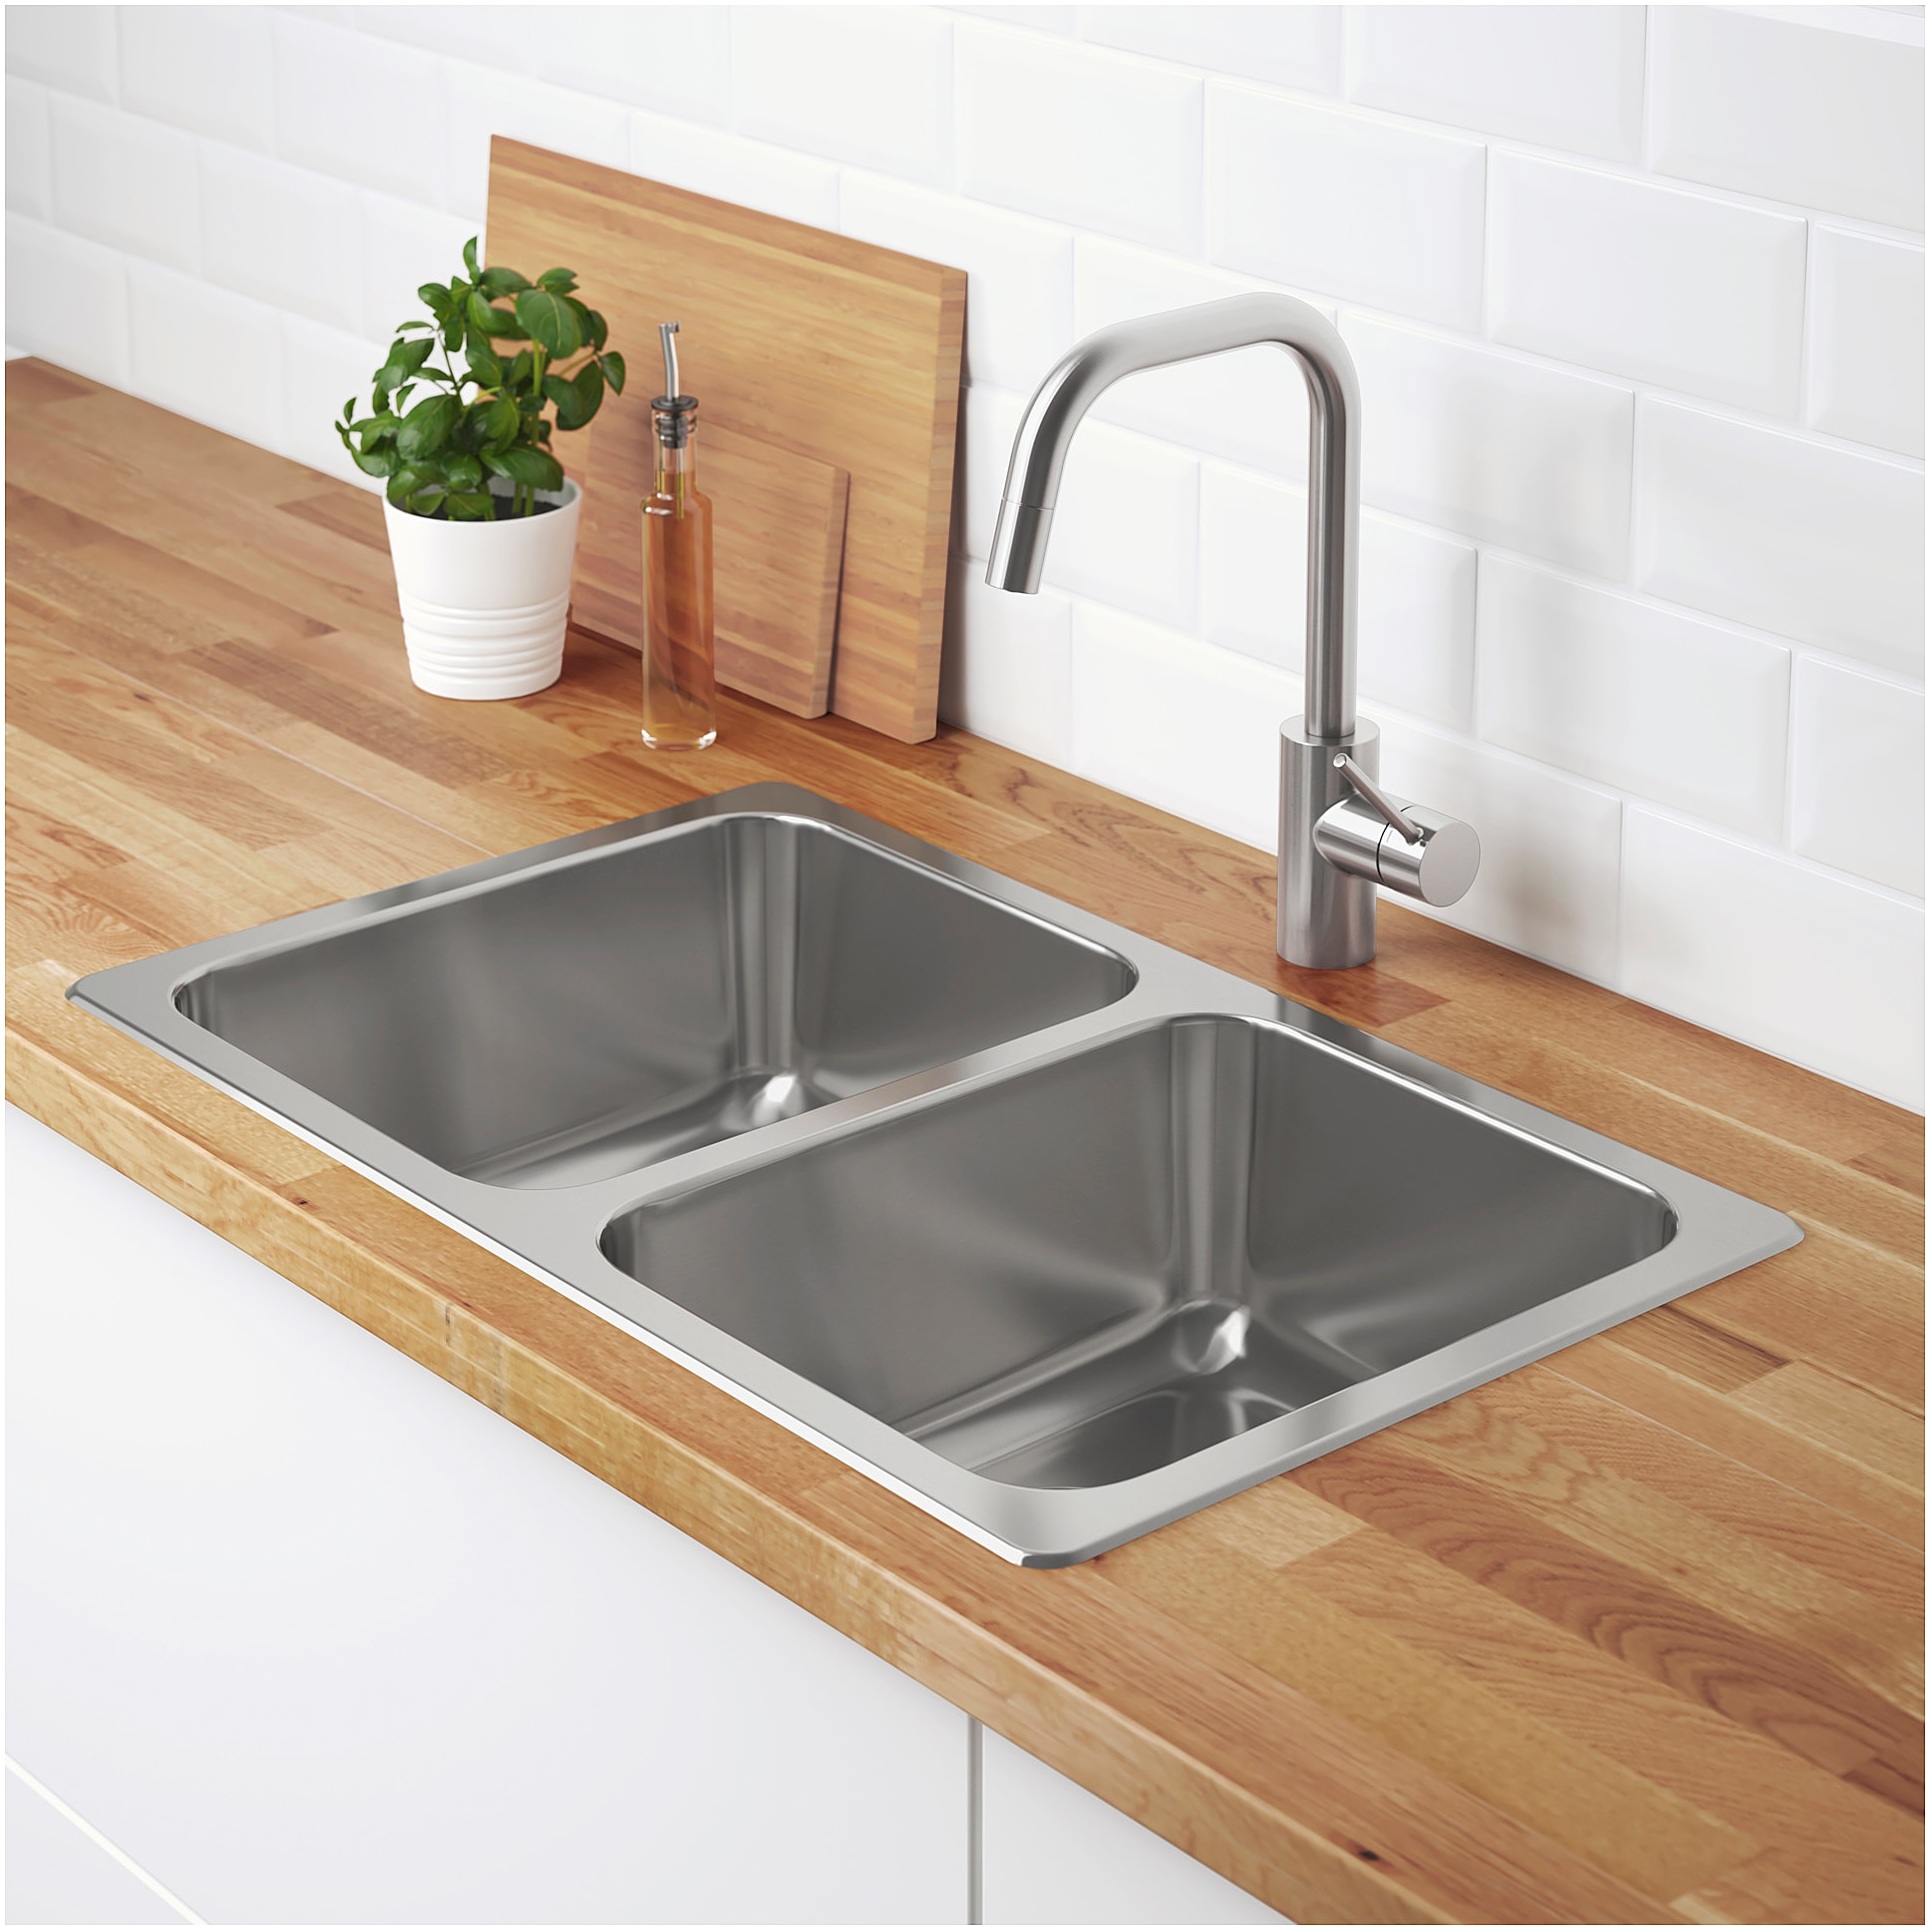 Top Mount Or Undermount Sinks, How Much Money Does It Cost To Replace A Kitchen Sink